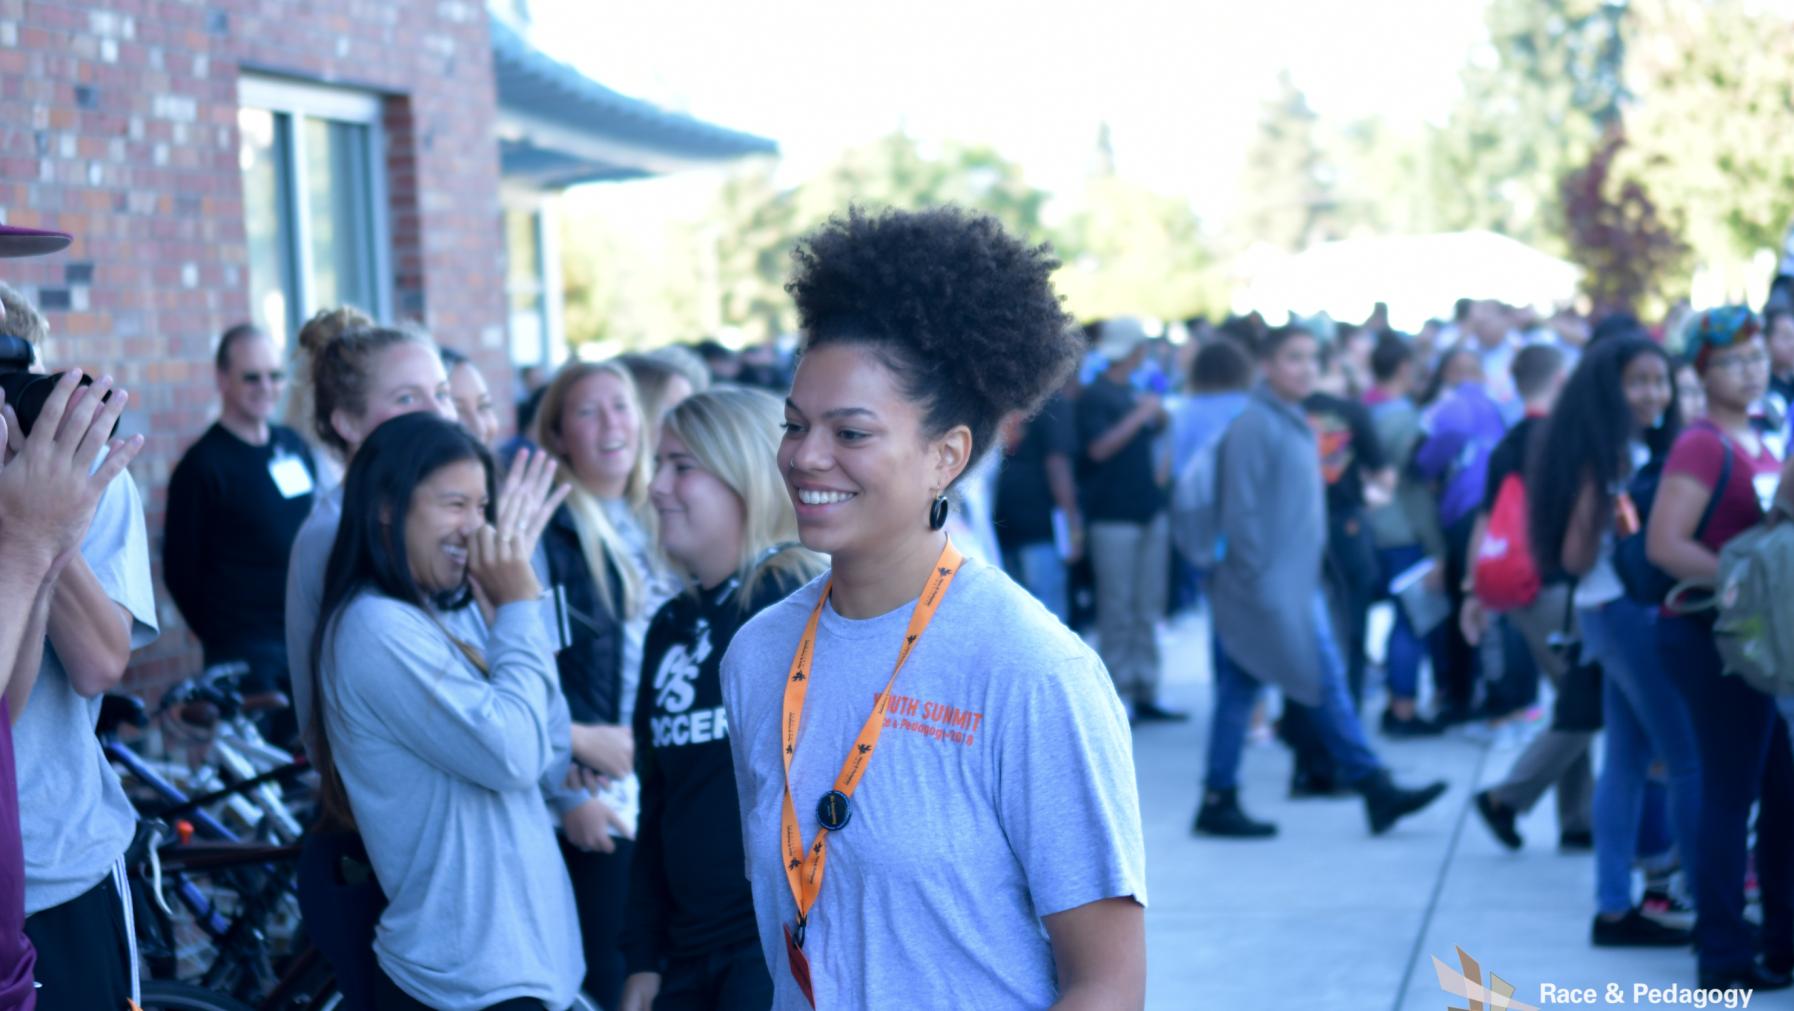 Puget Sound Student leader entering the fieldhouse amongst youth summit participants, smiling